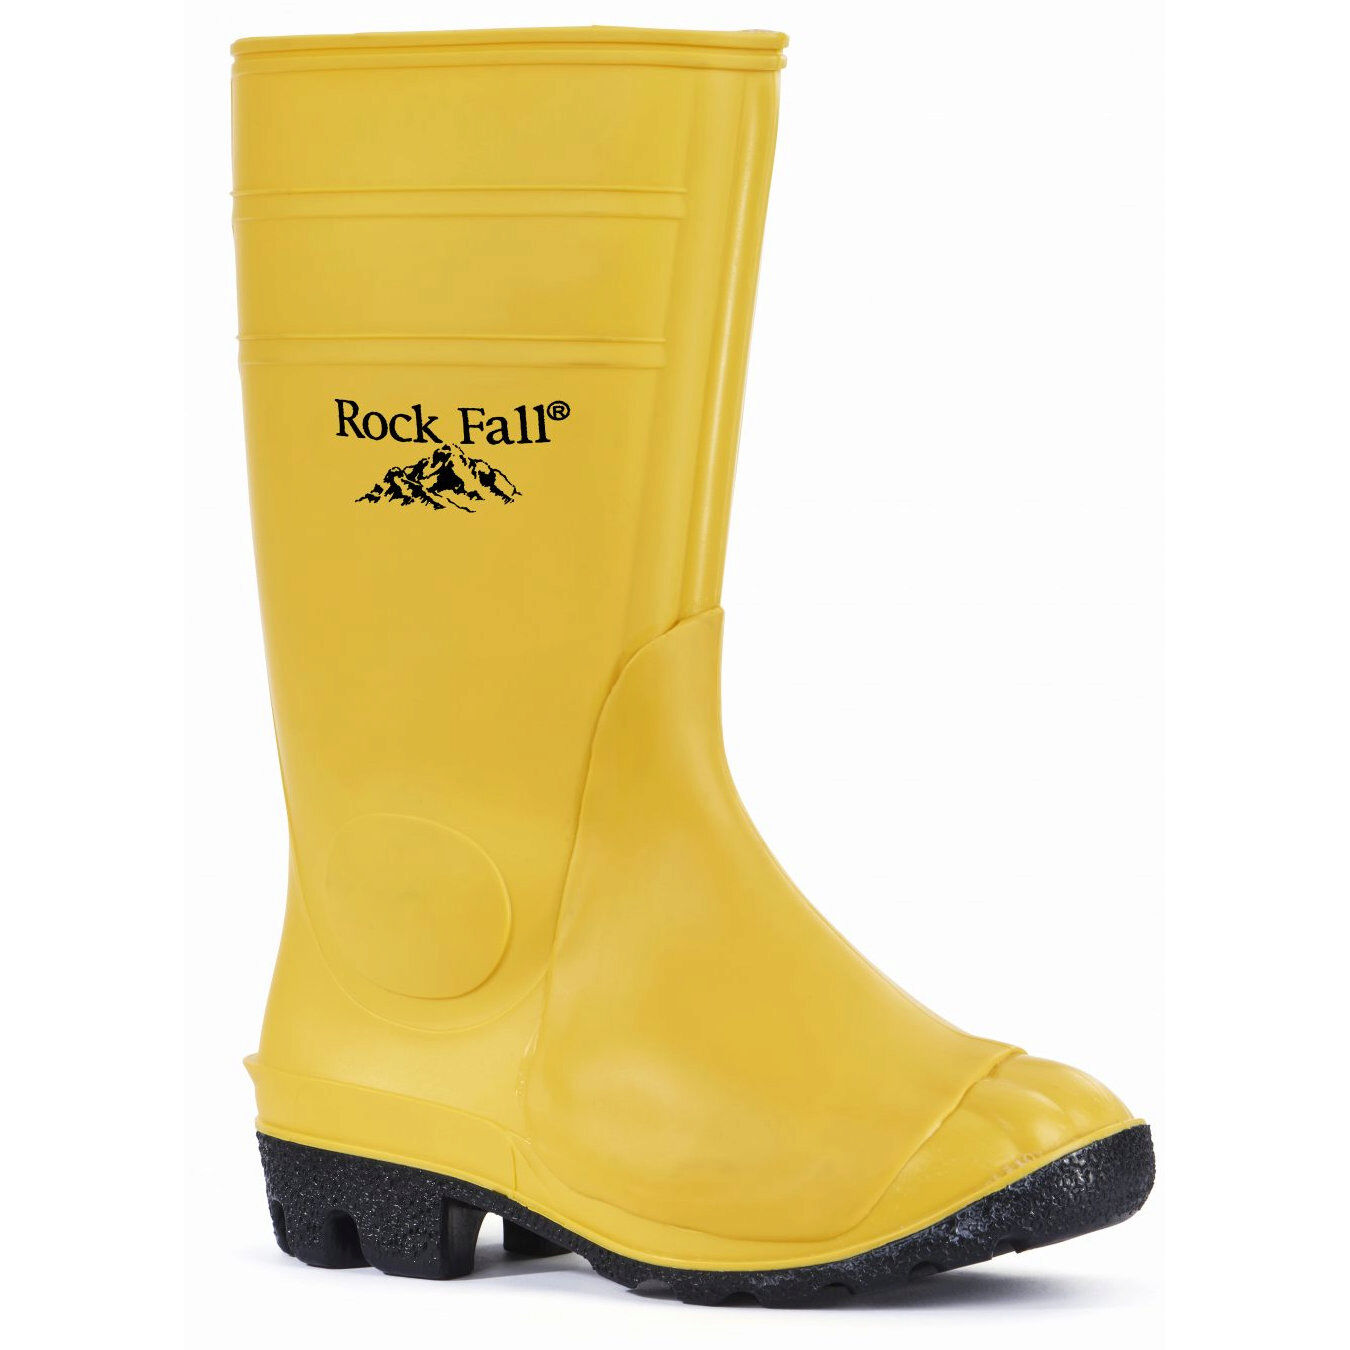 Rock Fall Swill Waterproof Protective Toe Cap and Midsole Safety Welly